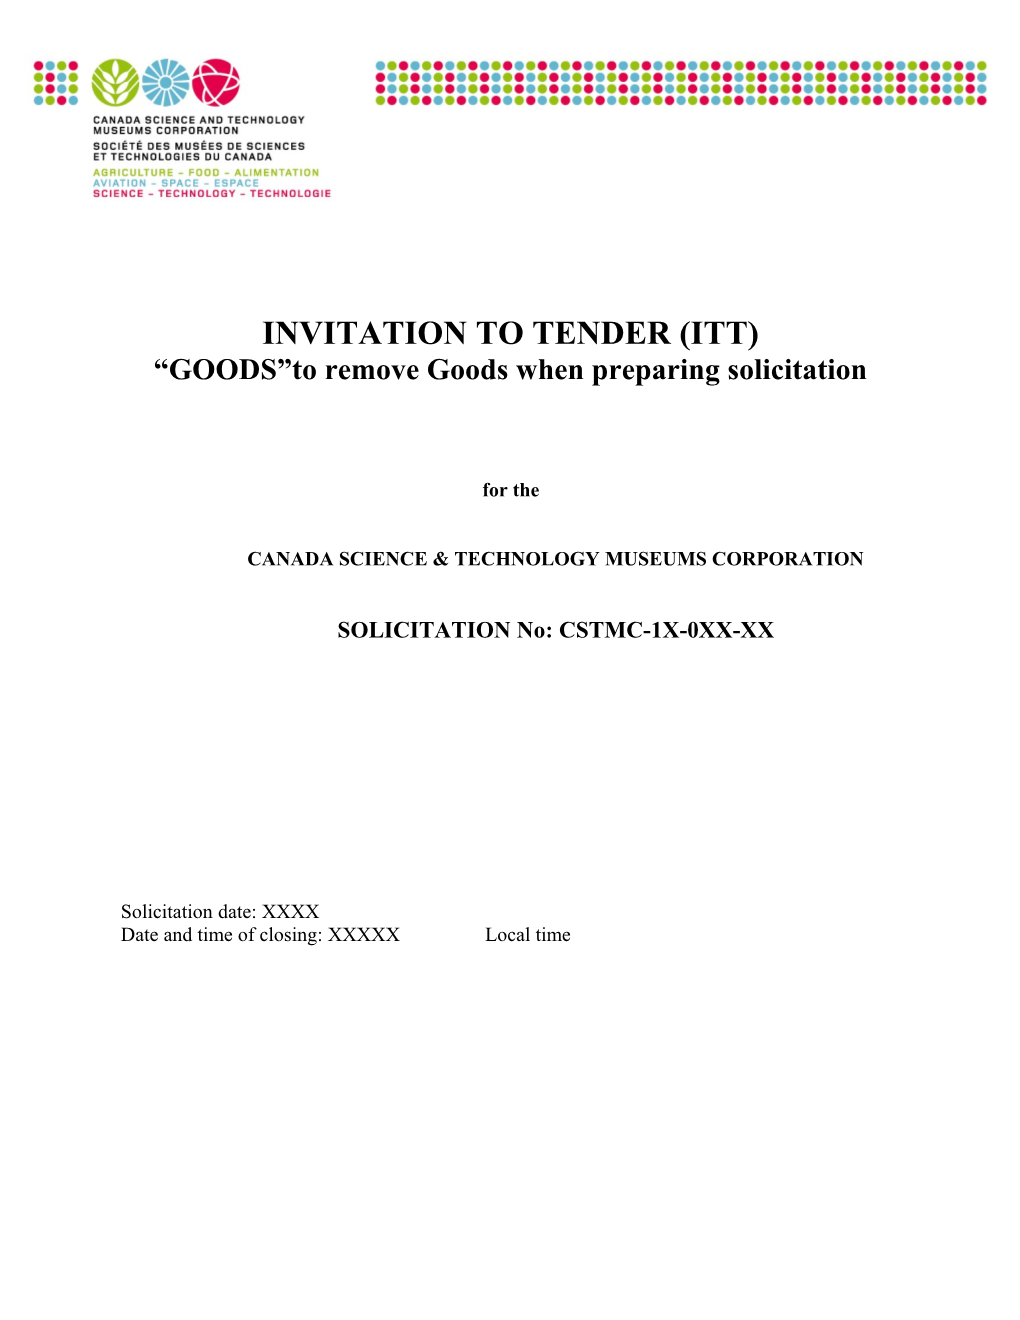 GOODS to Remove Goods When Preparing Solicitation